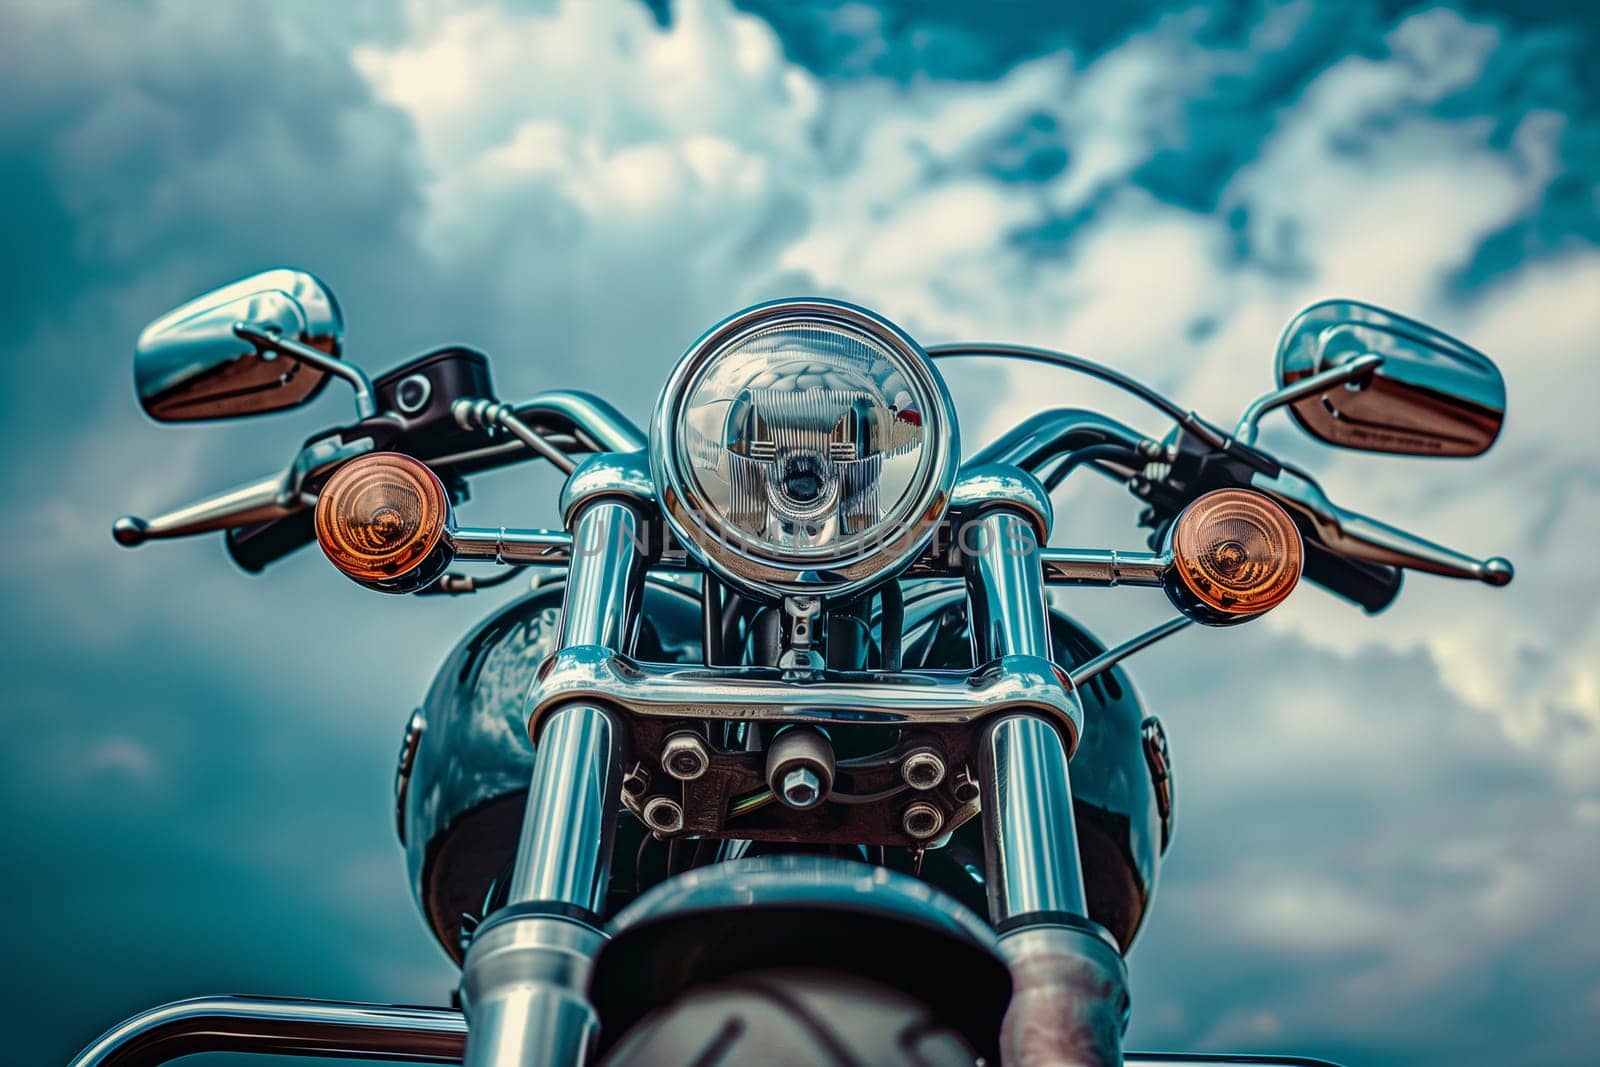 A detailed view of a motorcycle standing prominently with a cloudy sky in the background.